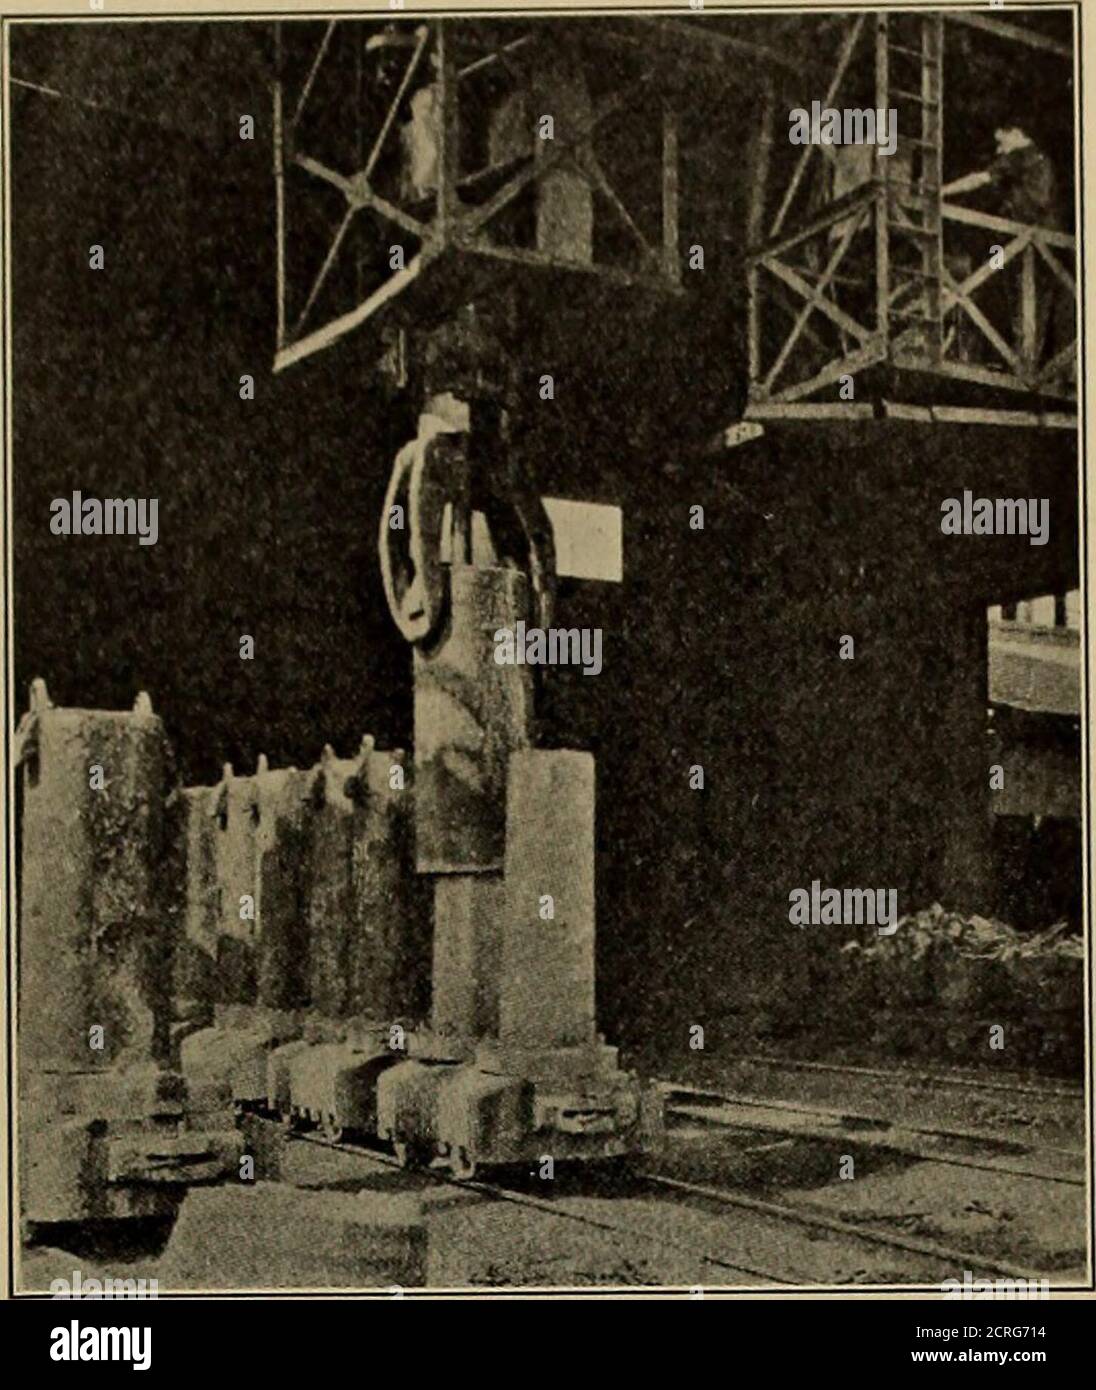 . Steel rails; their history, properties, strength and manufacture, with notes on the principles of rolling stock and track design . Fig. 271. — Teeming Ingots at Open-hearth Furnace. (Copyright, Koistoae iov Co.) ingot mold cars are run under the stripper, shown in Fig. 272, from which hooksare lowered and engage the lugs on either side of the mold and lift it off theingot. The ingot is then taken up by a traveling crane and conveyed to the re-heating furnaces or soaking pits, shown by Figs. 273 and 274, to allow the tem-perature in all parts of the ingot to become equalized before rolling. Stock Photo